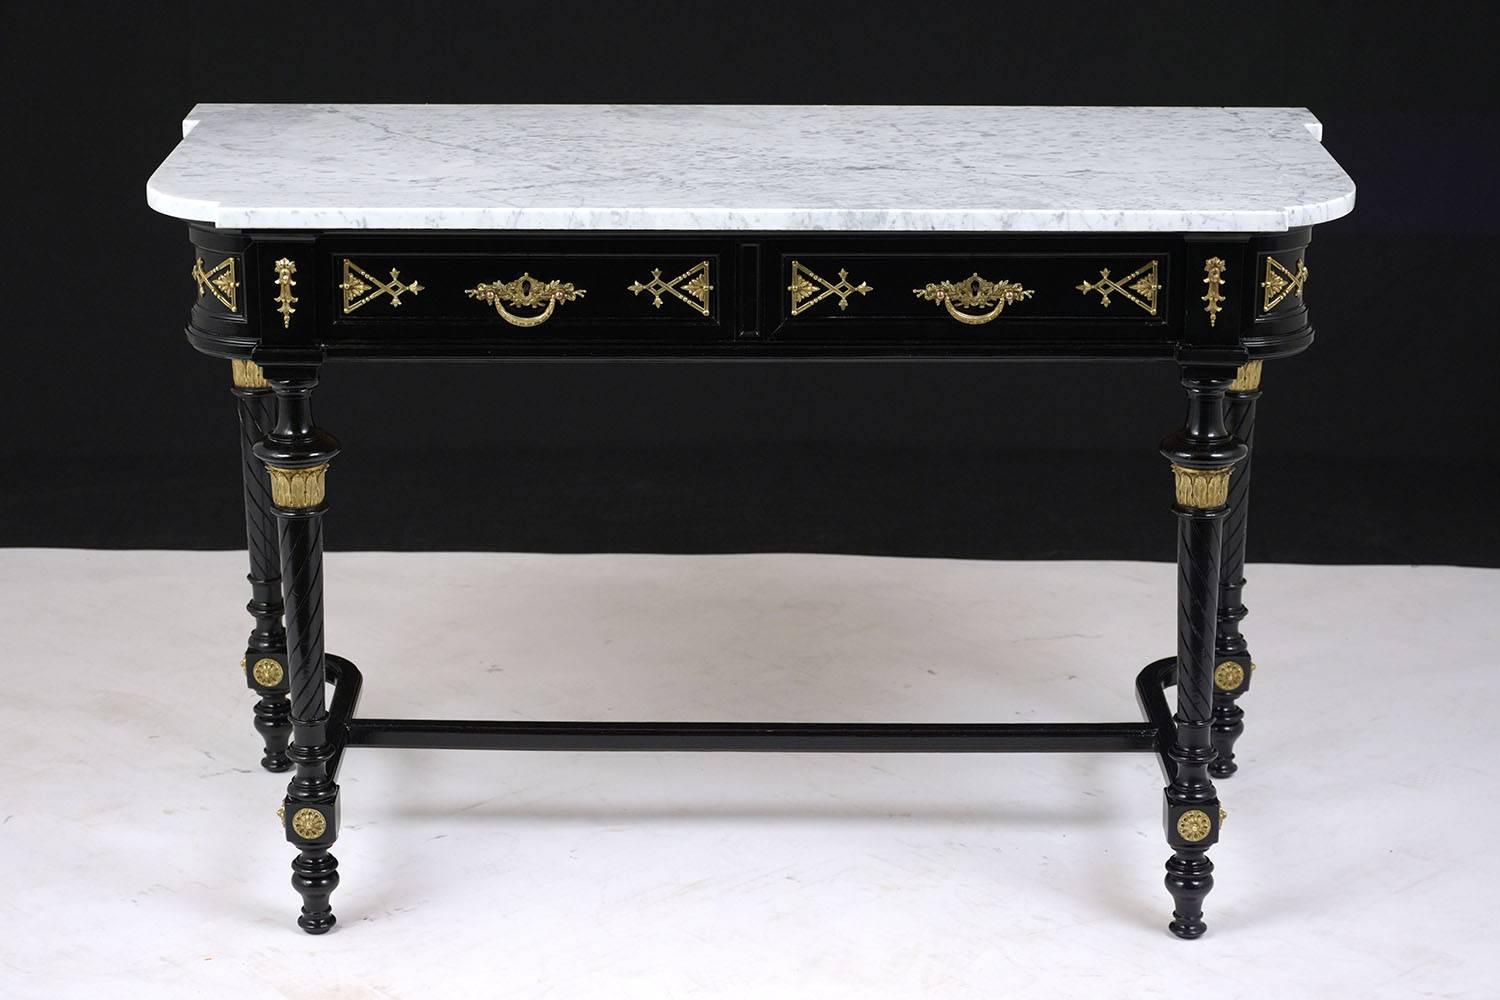 This Late 19th Century Louis XVI Console Table is made of mahogany wood with an ebonized lacquered finish and has a white marble top with grey veins. The sofa table features two top drawers with ornate brass pulls, bronze accents of acanthus